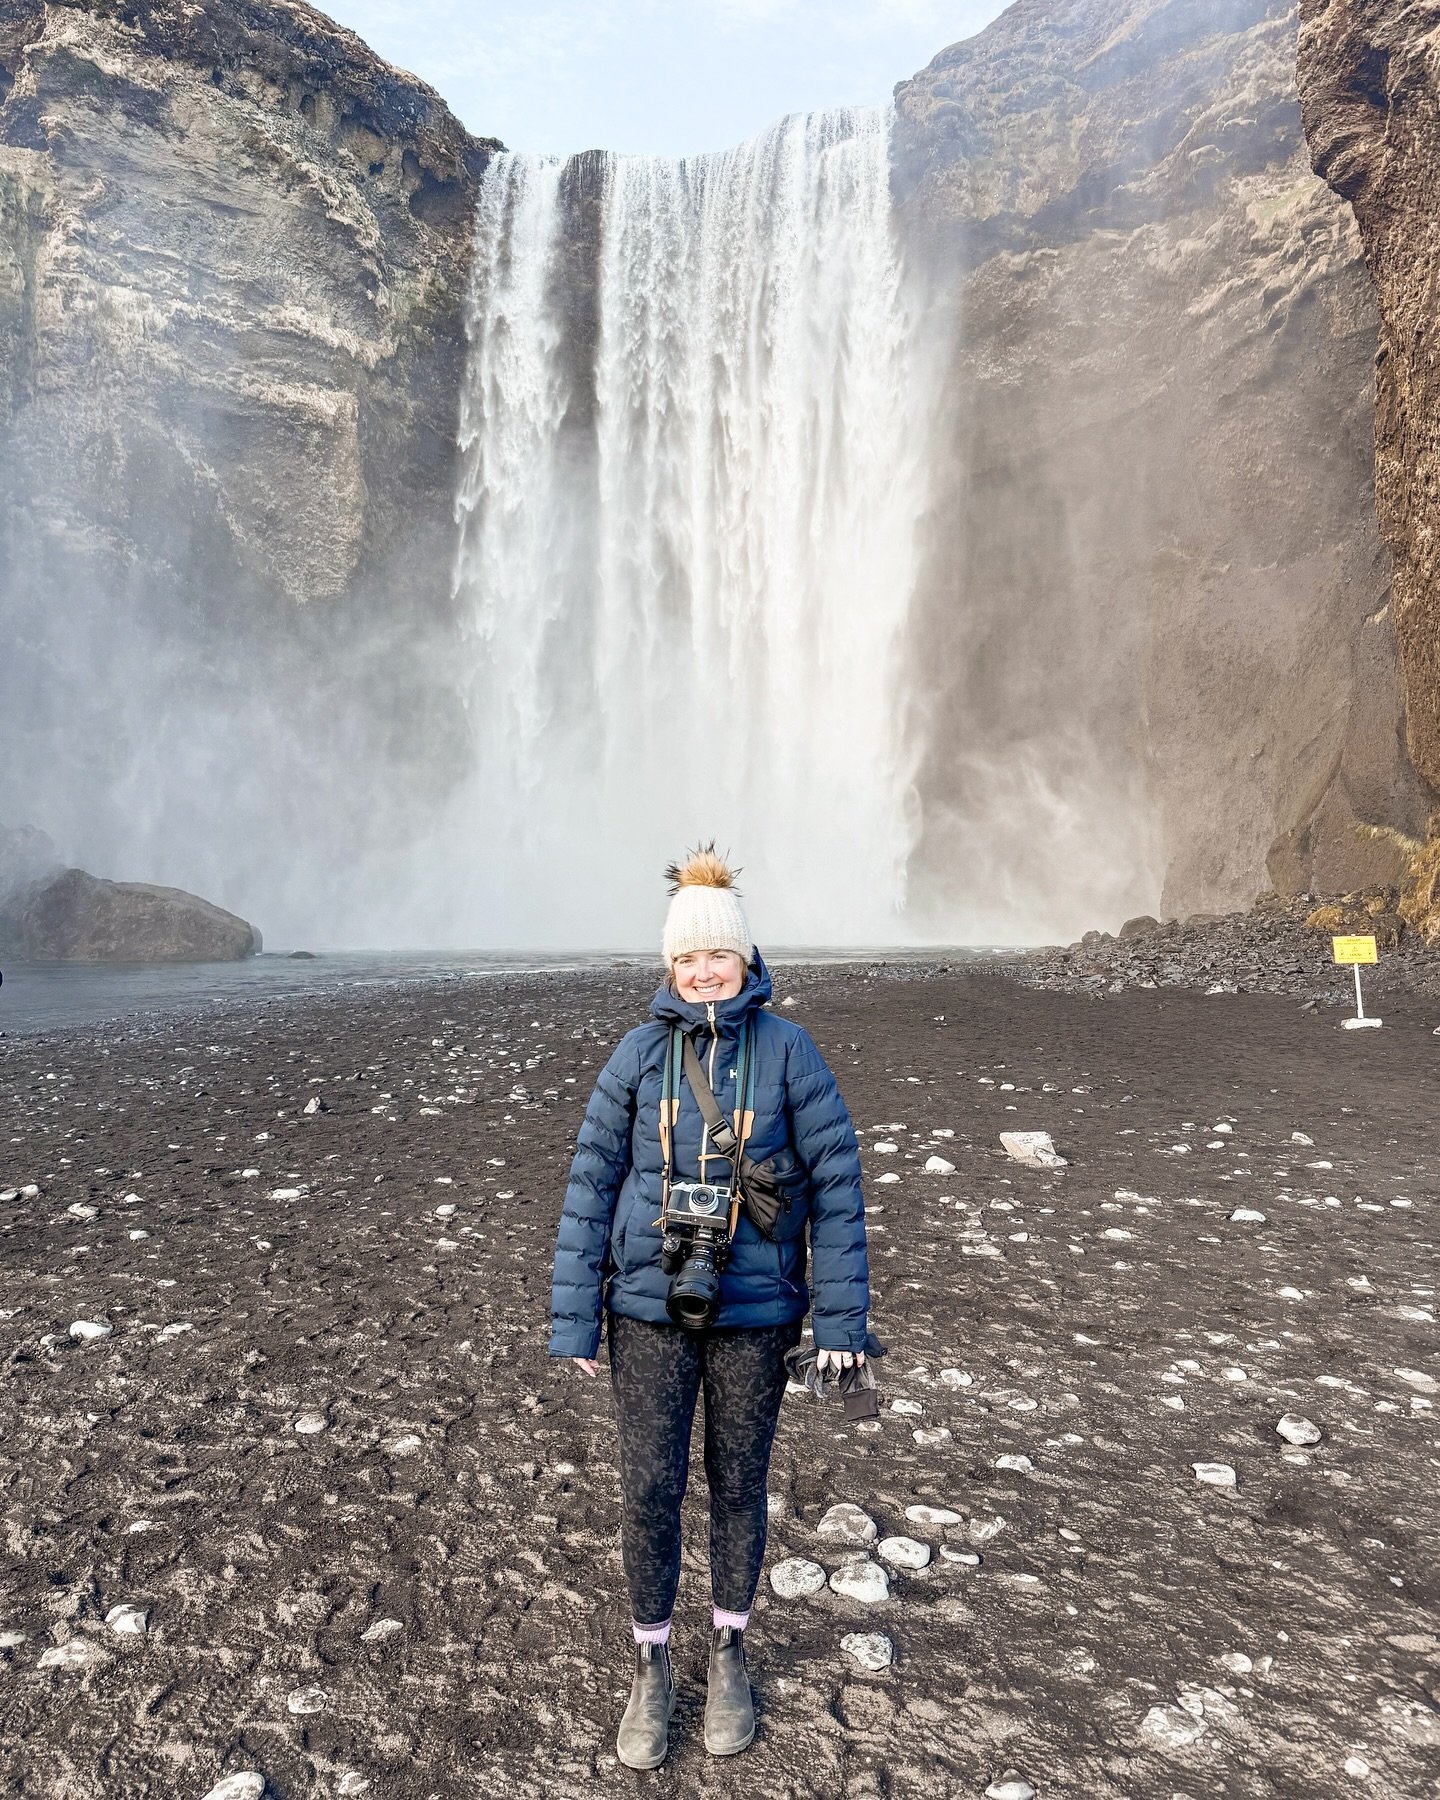 spent the last few days of my 20s exploring iceland and photographing two couples with a group of wonderful people. thank you @roadieevents for bringing me out of my comfort zone! 🏔️ excited for all to come in my thirties! especially marrying the lo